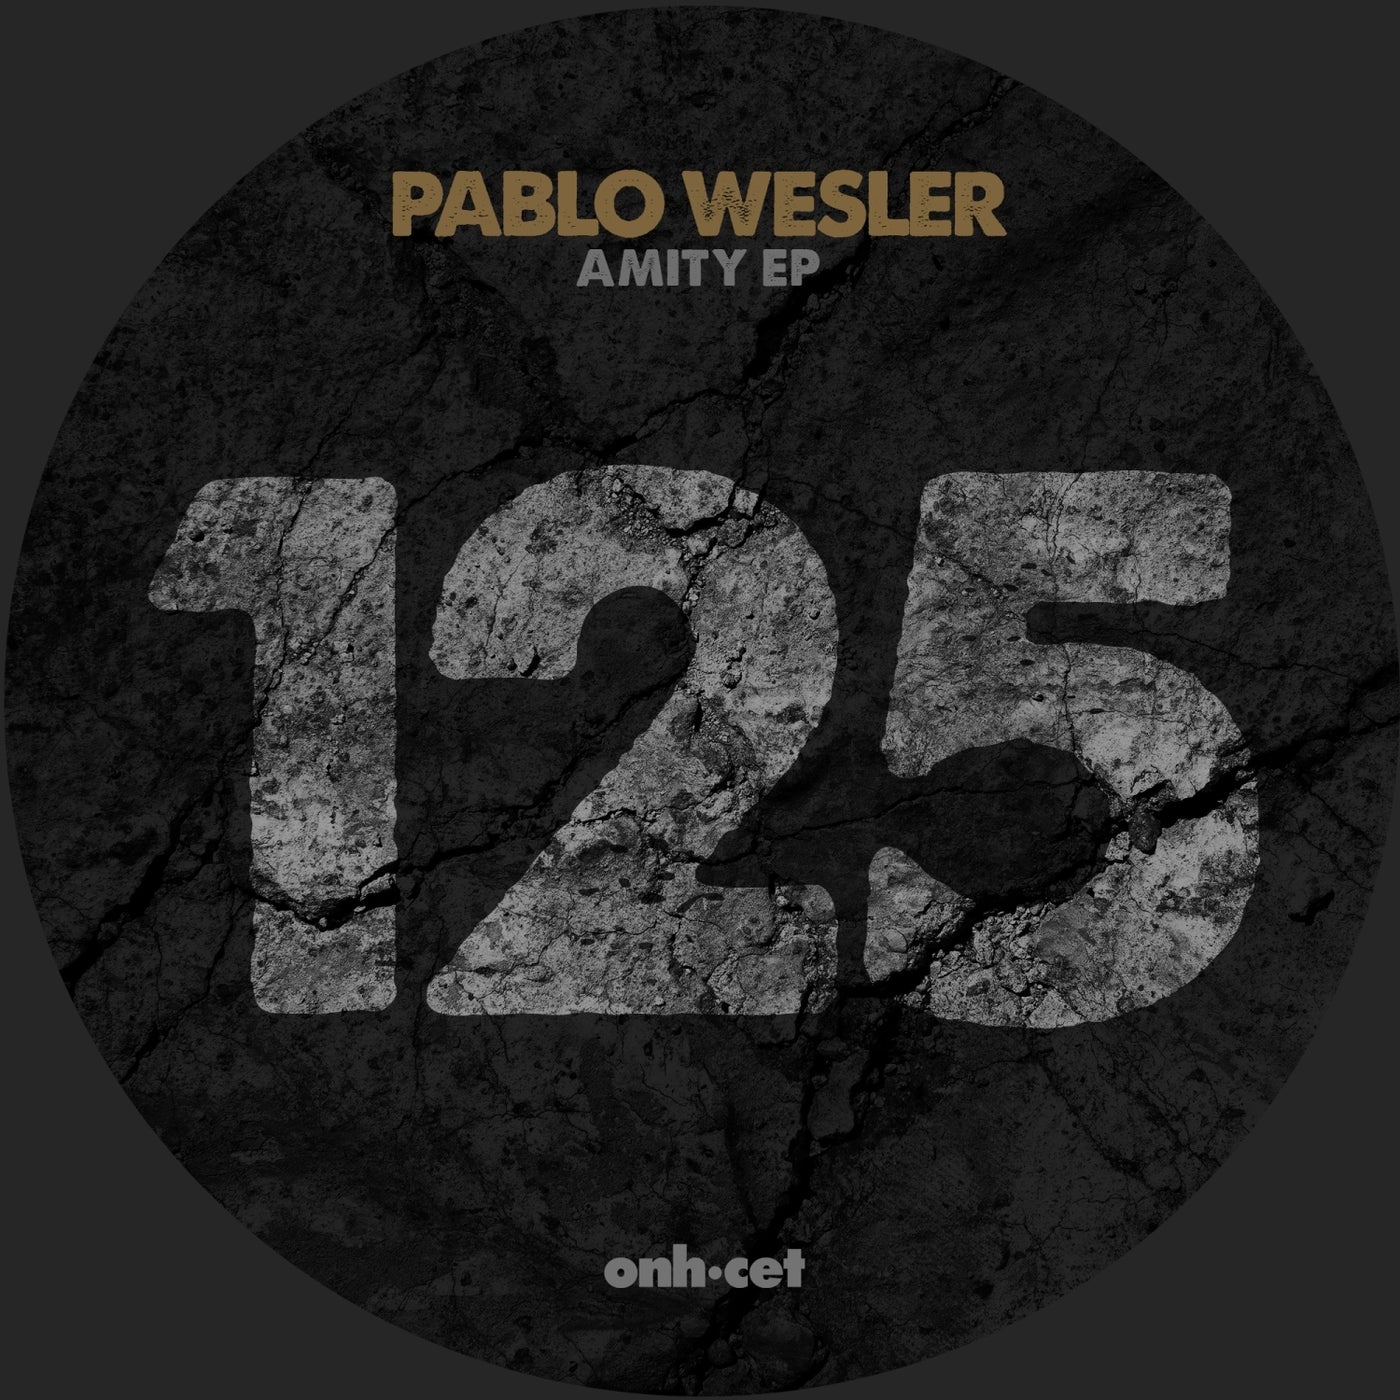 image cover: Pablo Wesler - Amity EP on ONHCET